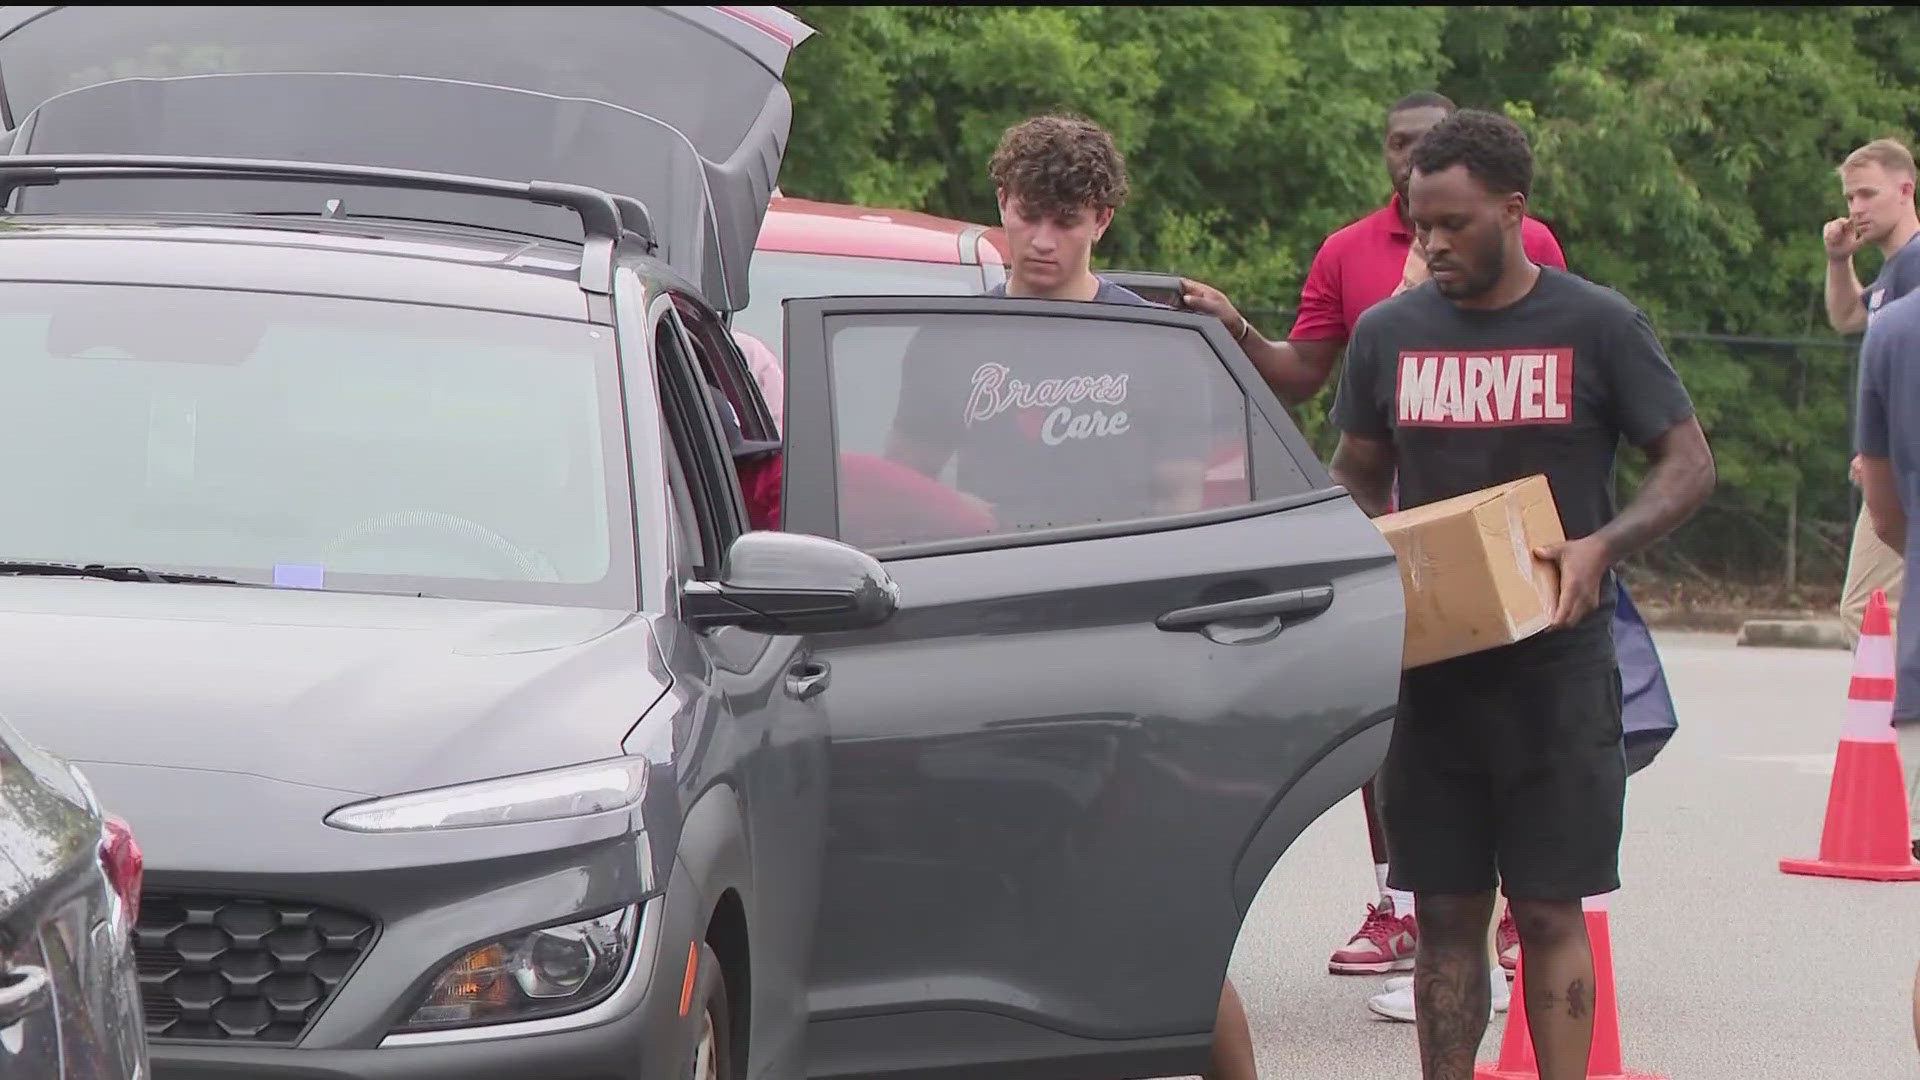 The Atlanta Braves Foundation and Chick-fil-A teamed up for an event today, giving out boxes of food to fight food insecurity in the metro Atlanta area.